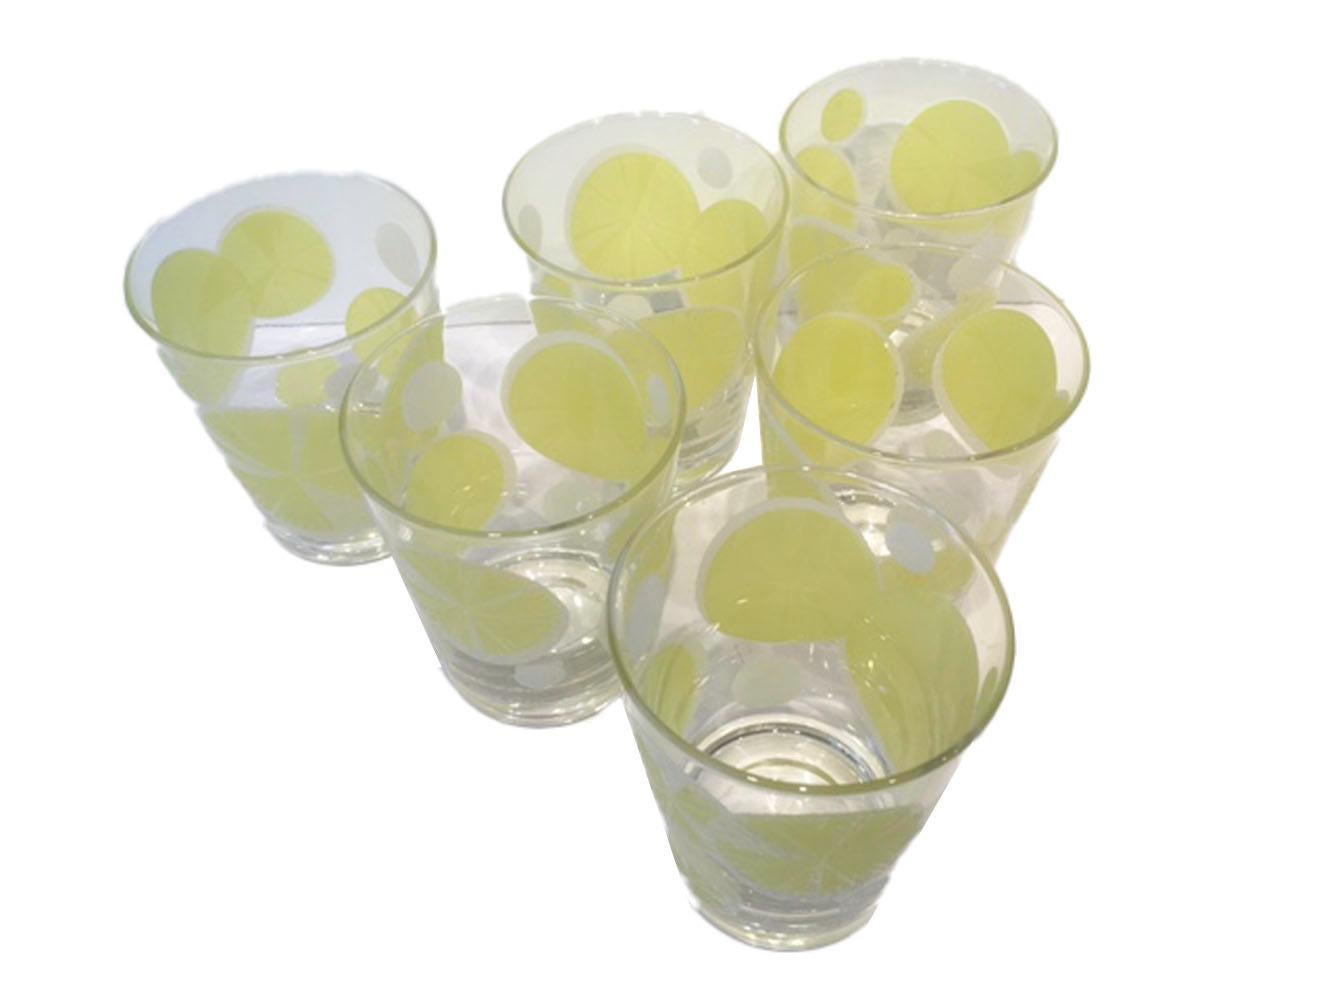 Vintage set of six double old fashioned glasses signed Fred Press. Decorated with raised 'sugaring' in yellow and white lemon slices on clear tapered glasses.